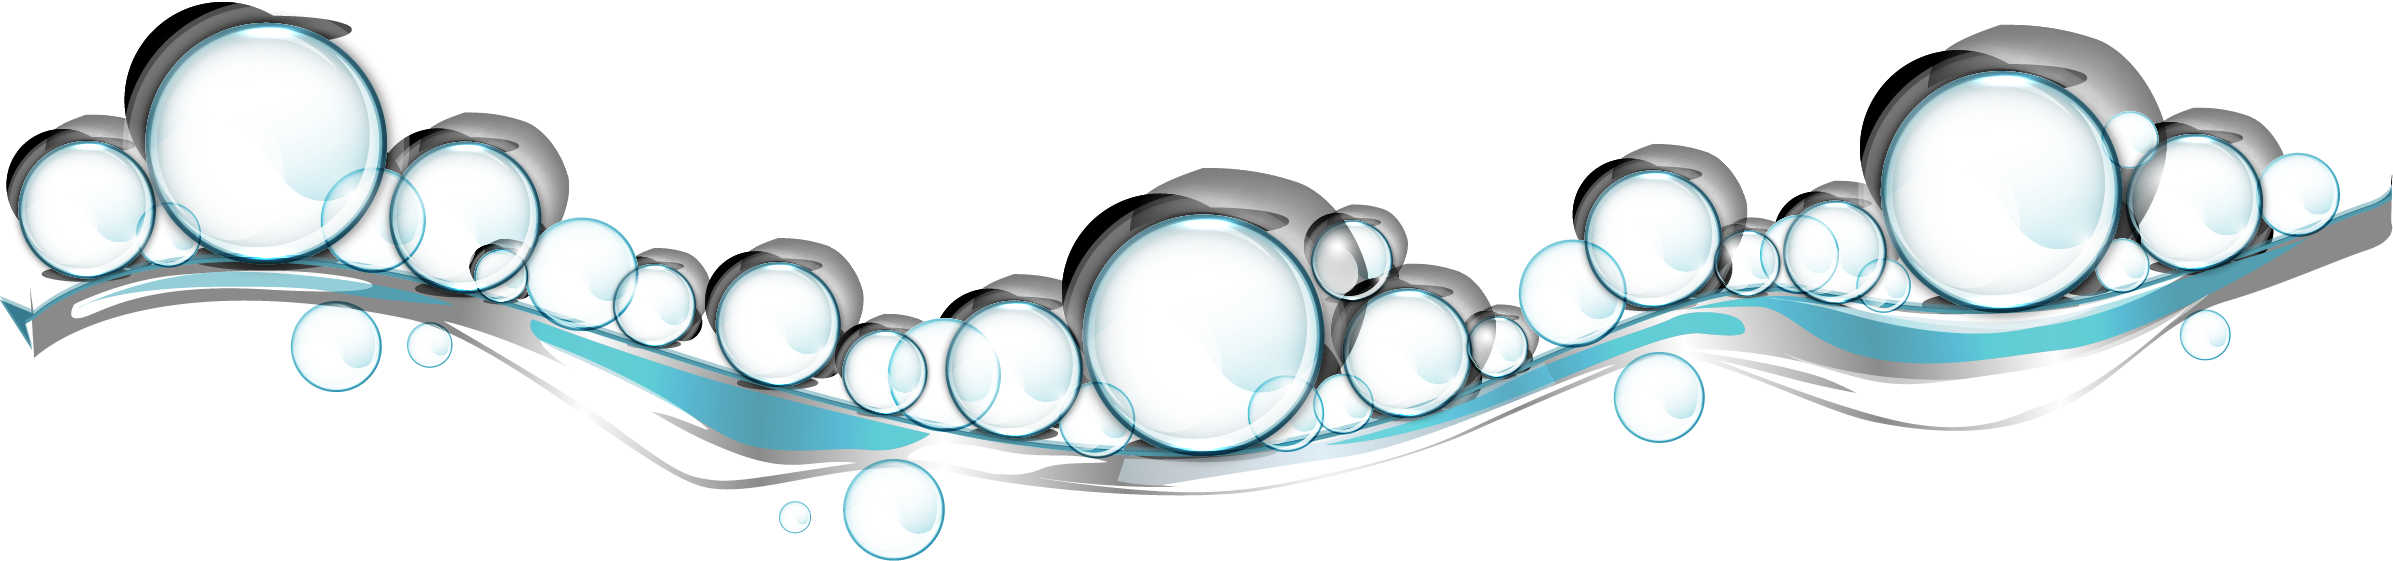 Water Bubbles Wave Graphic PNG